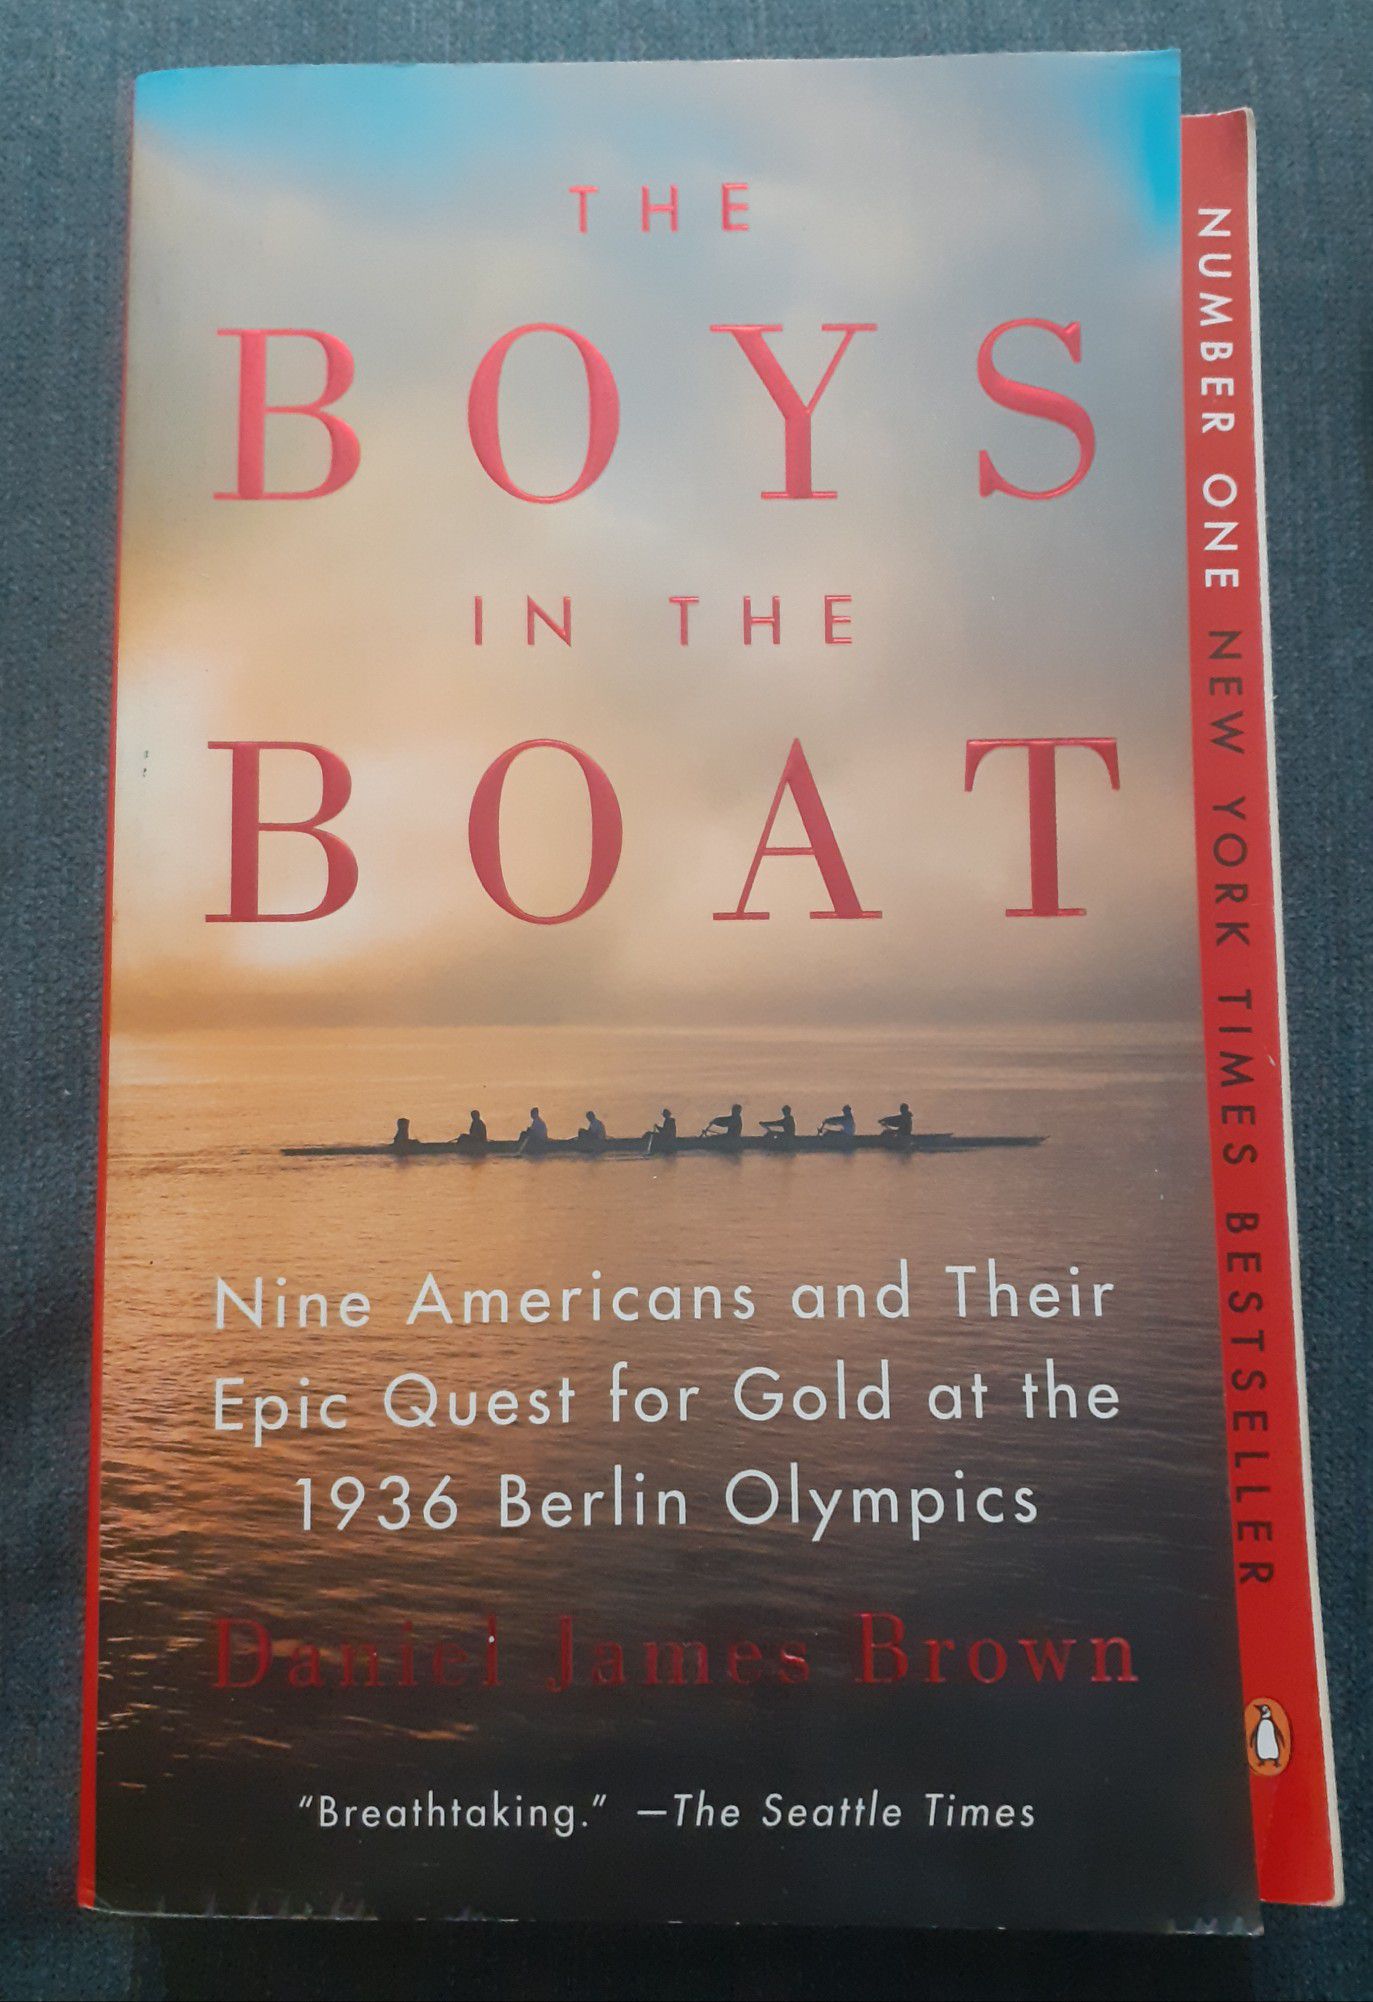 The Boys in the Boat : The True Story of an American Team's Epic Journey to Win Gold at the 1936 Olympics by Daniel James Brown